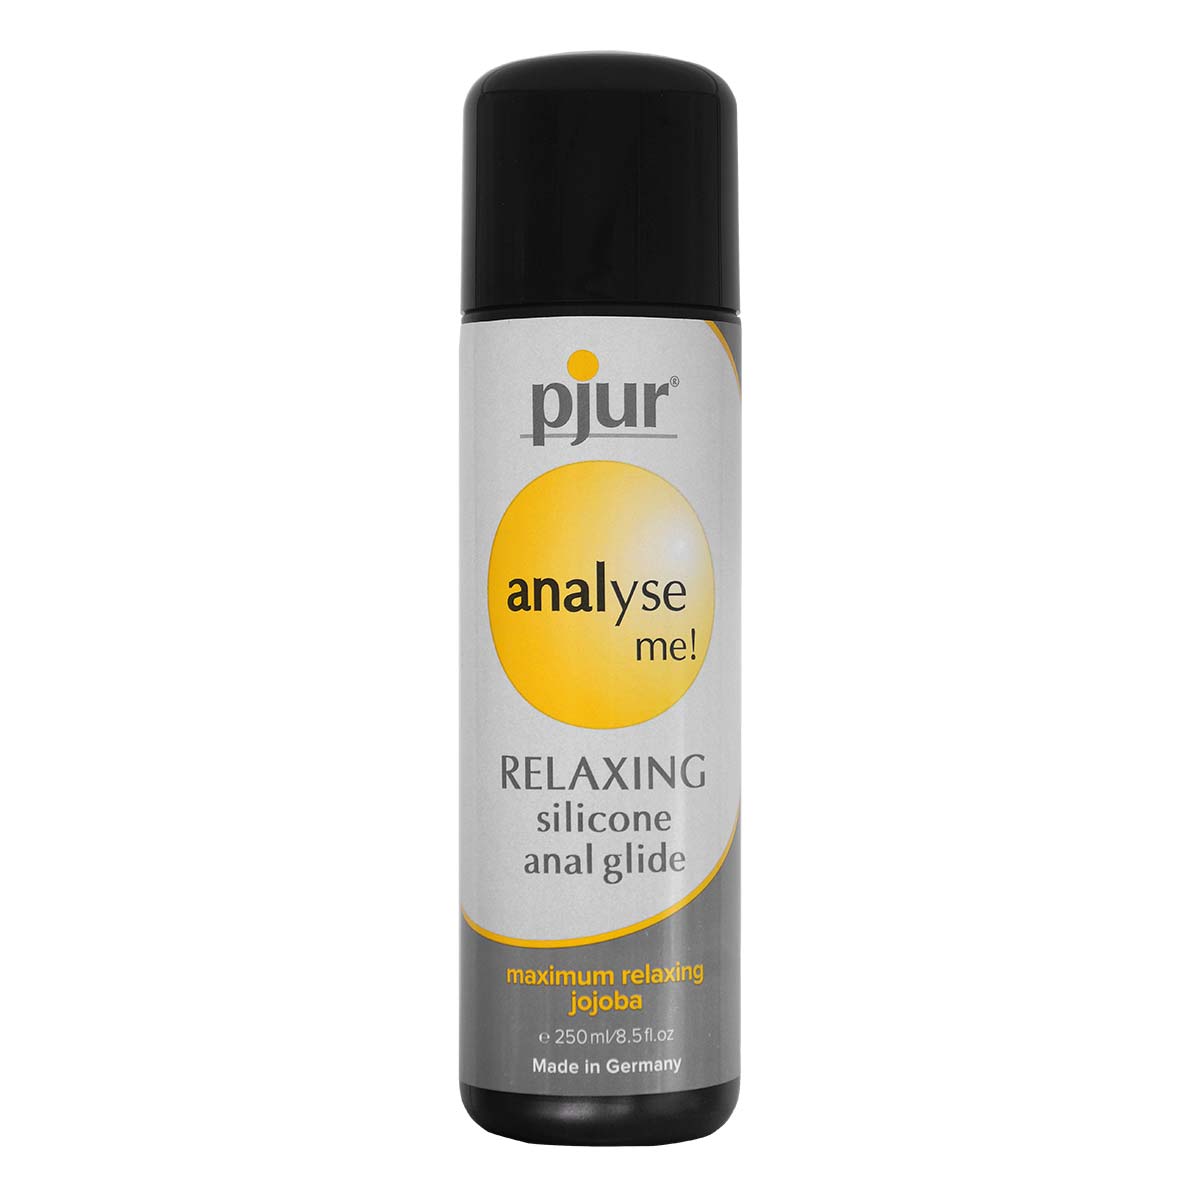 pjur analyse me! RELAXING Silicone Anal Glide 250ml Silicone-based Lubricant-p_2